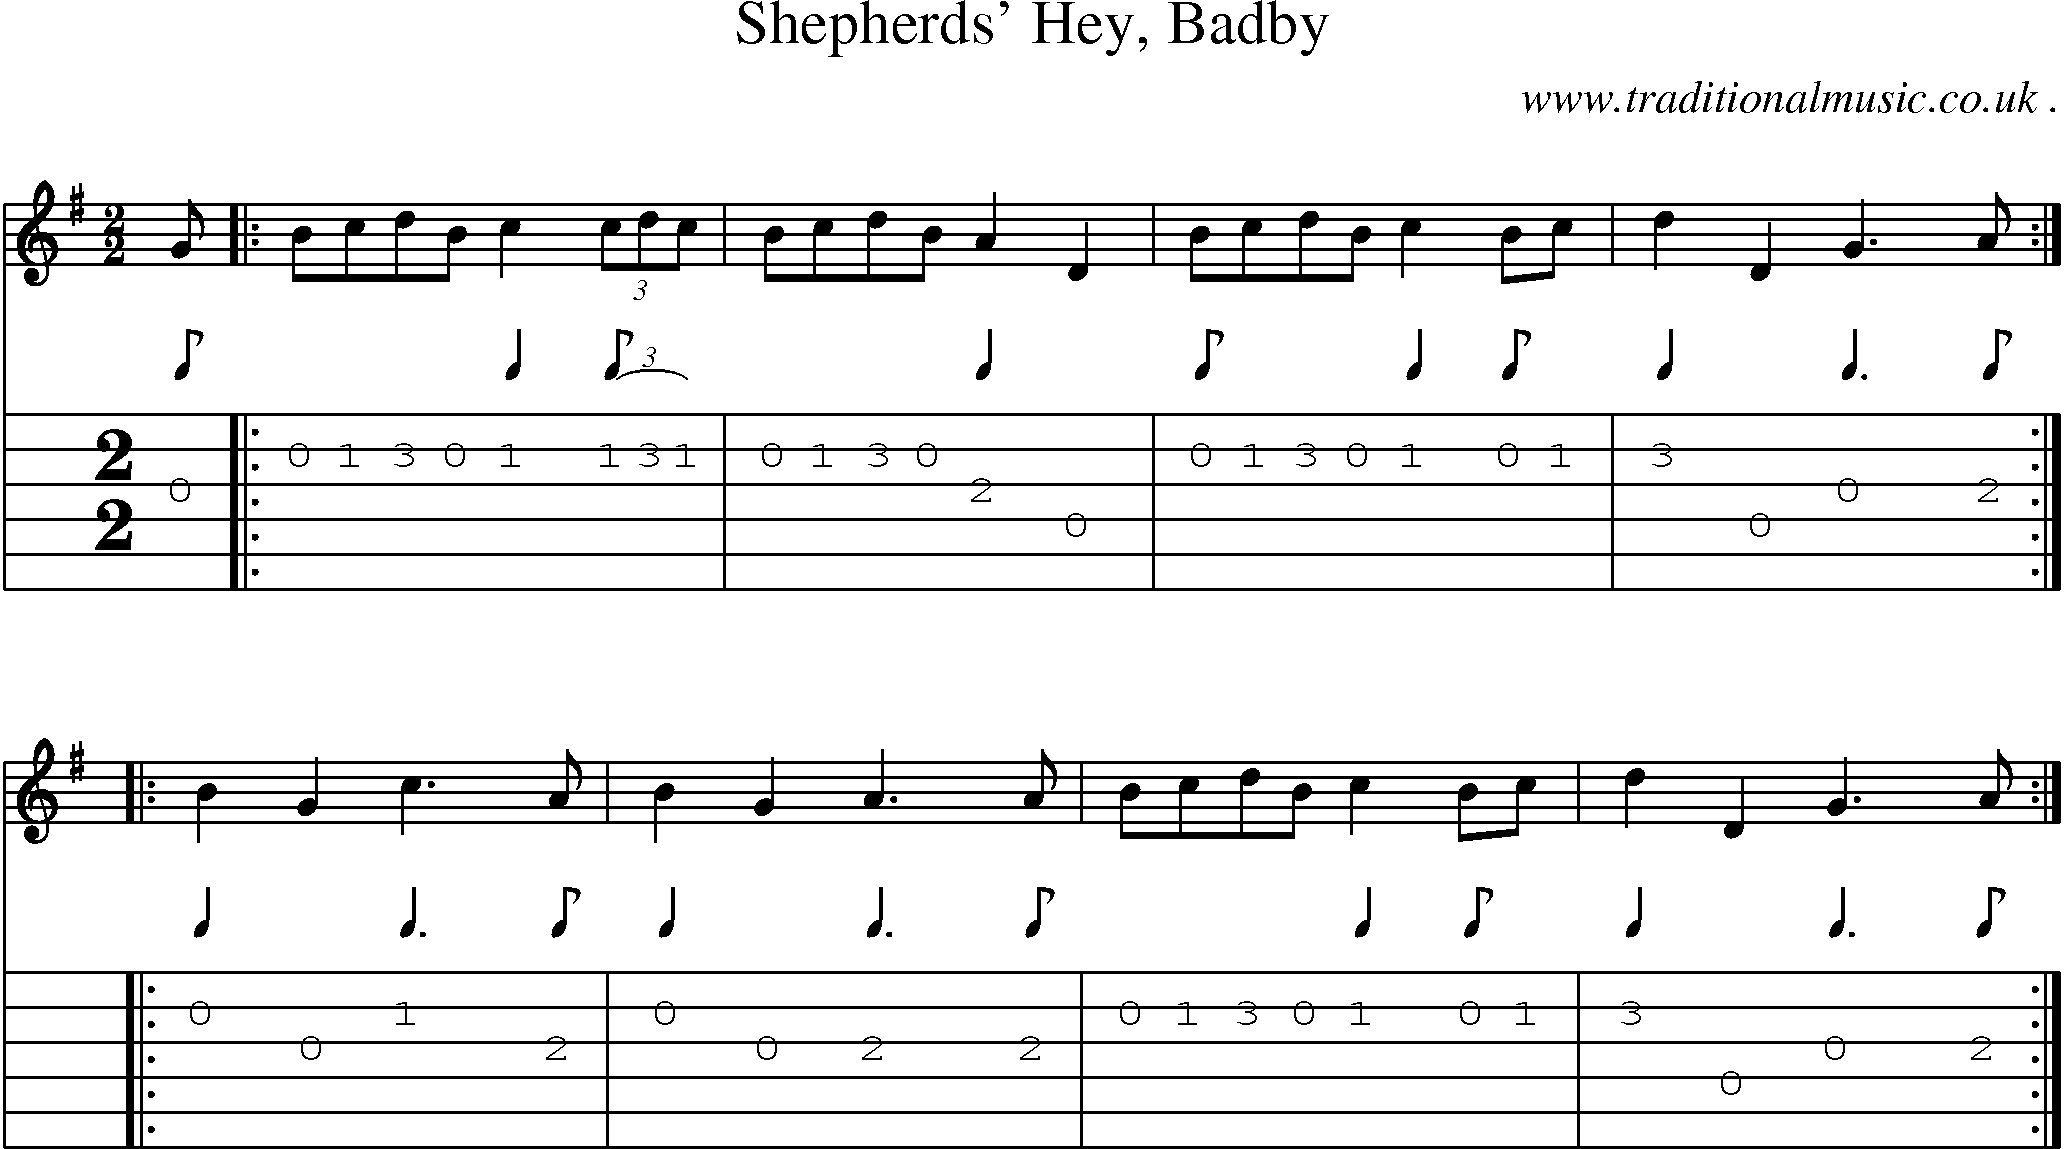 Sheet-Music and Guitar Tabs for Shepherds Hey Badby